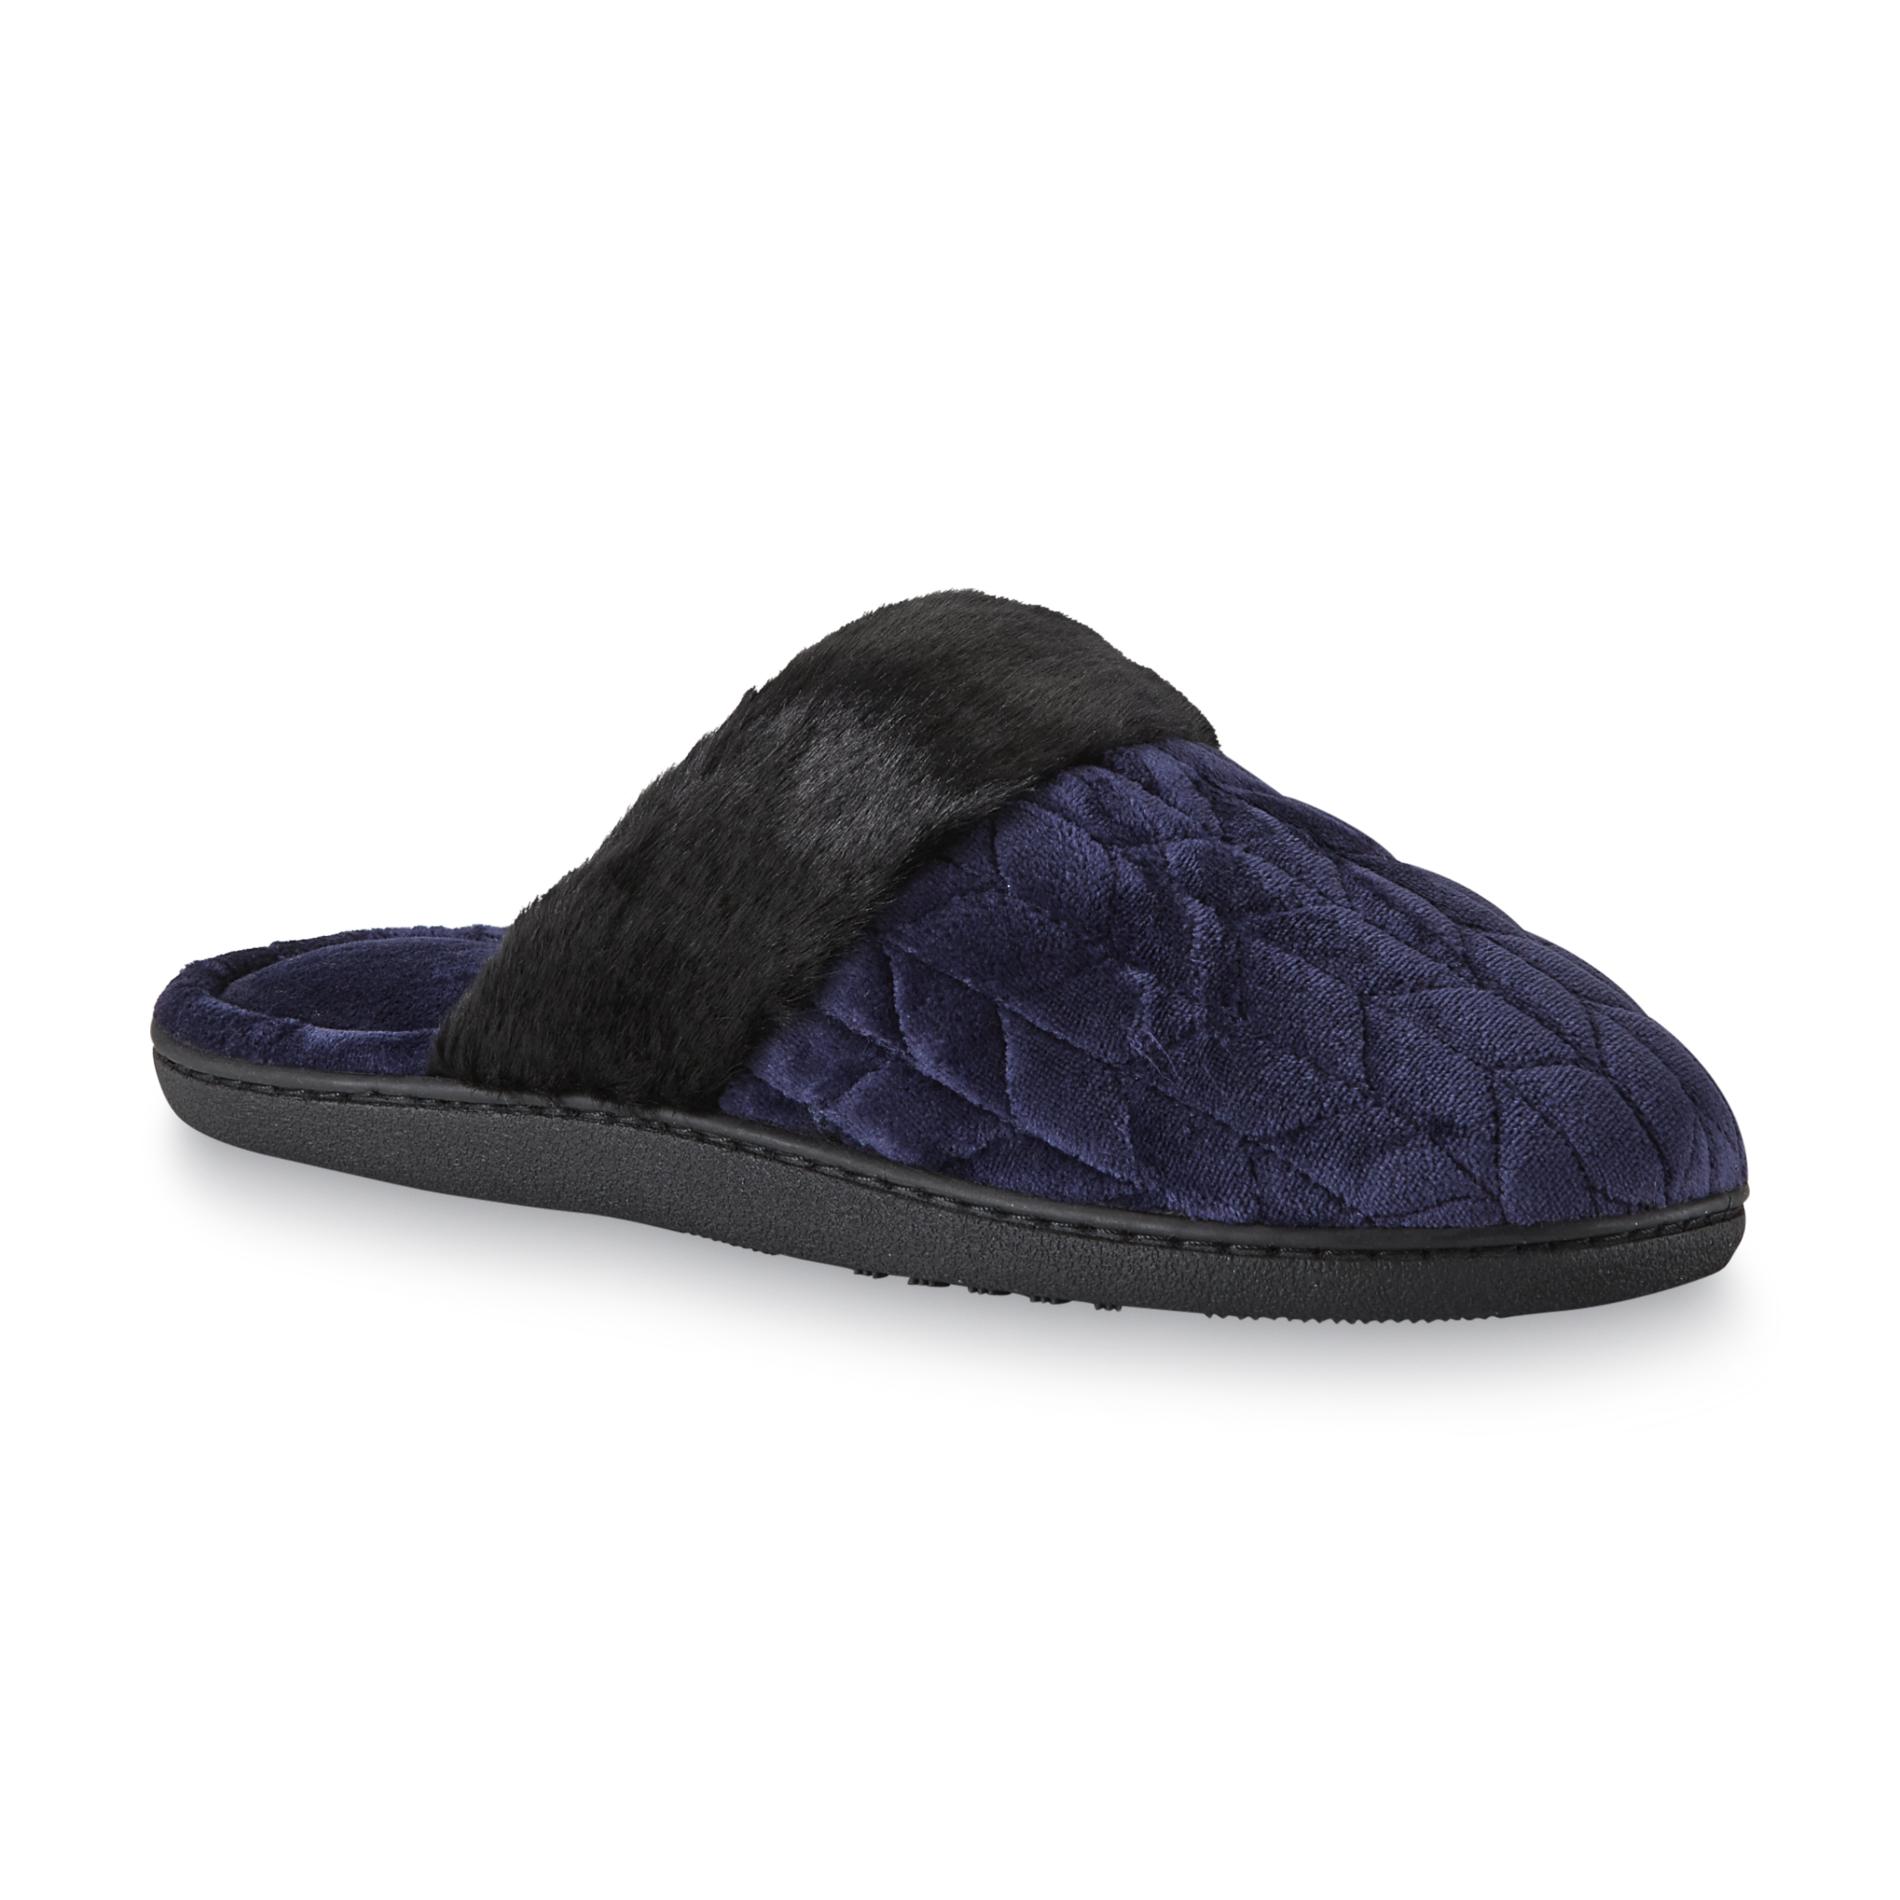 Isotoner Women's Cora Quilted Plush Slippers - Faux Fur